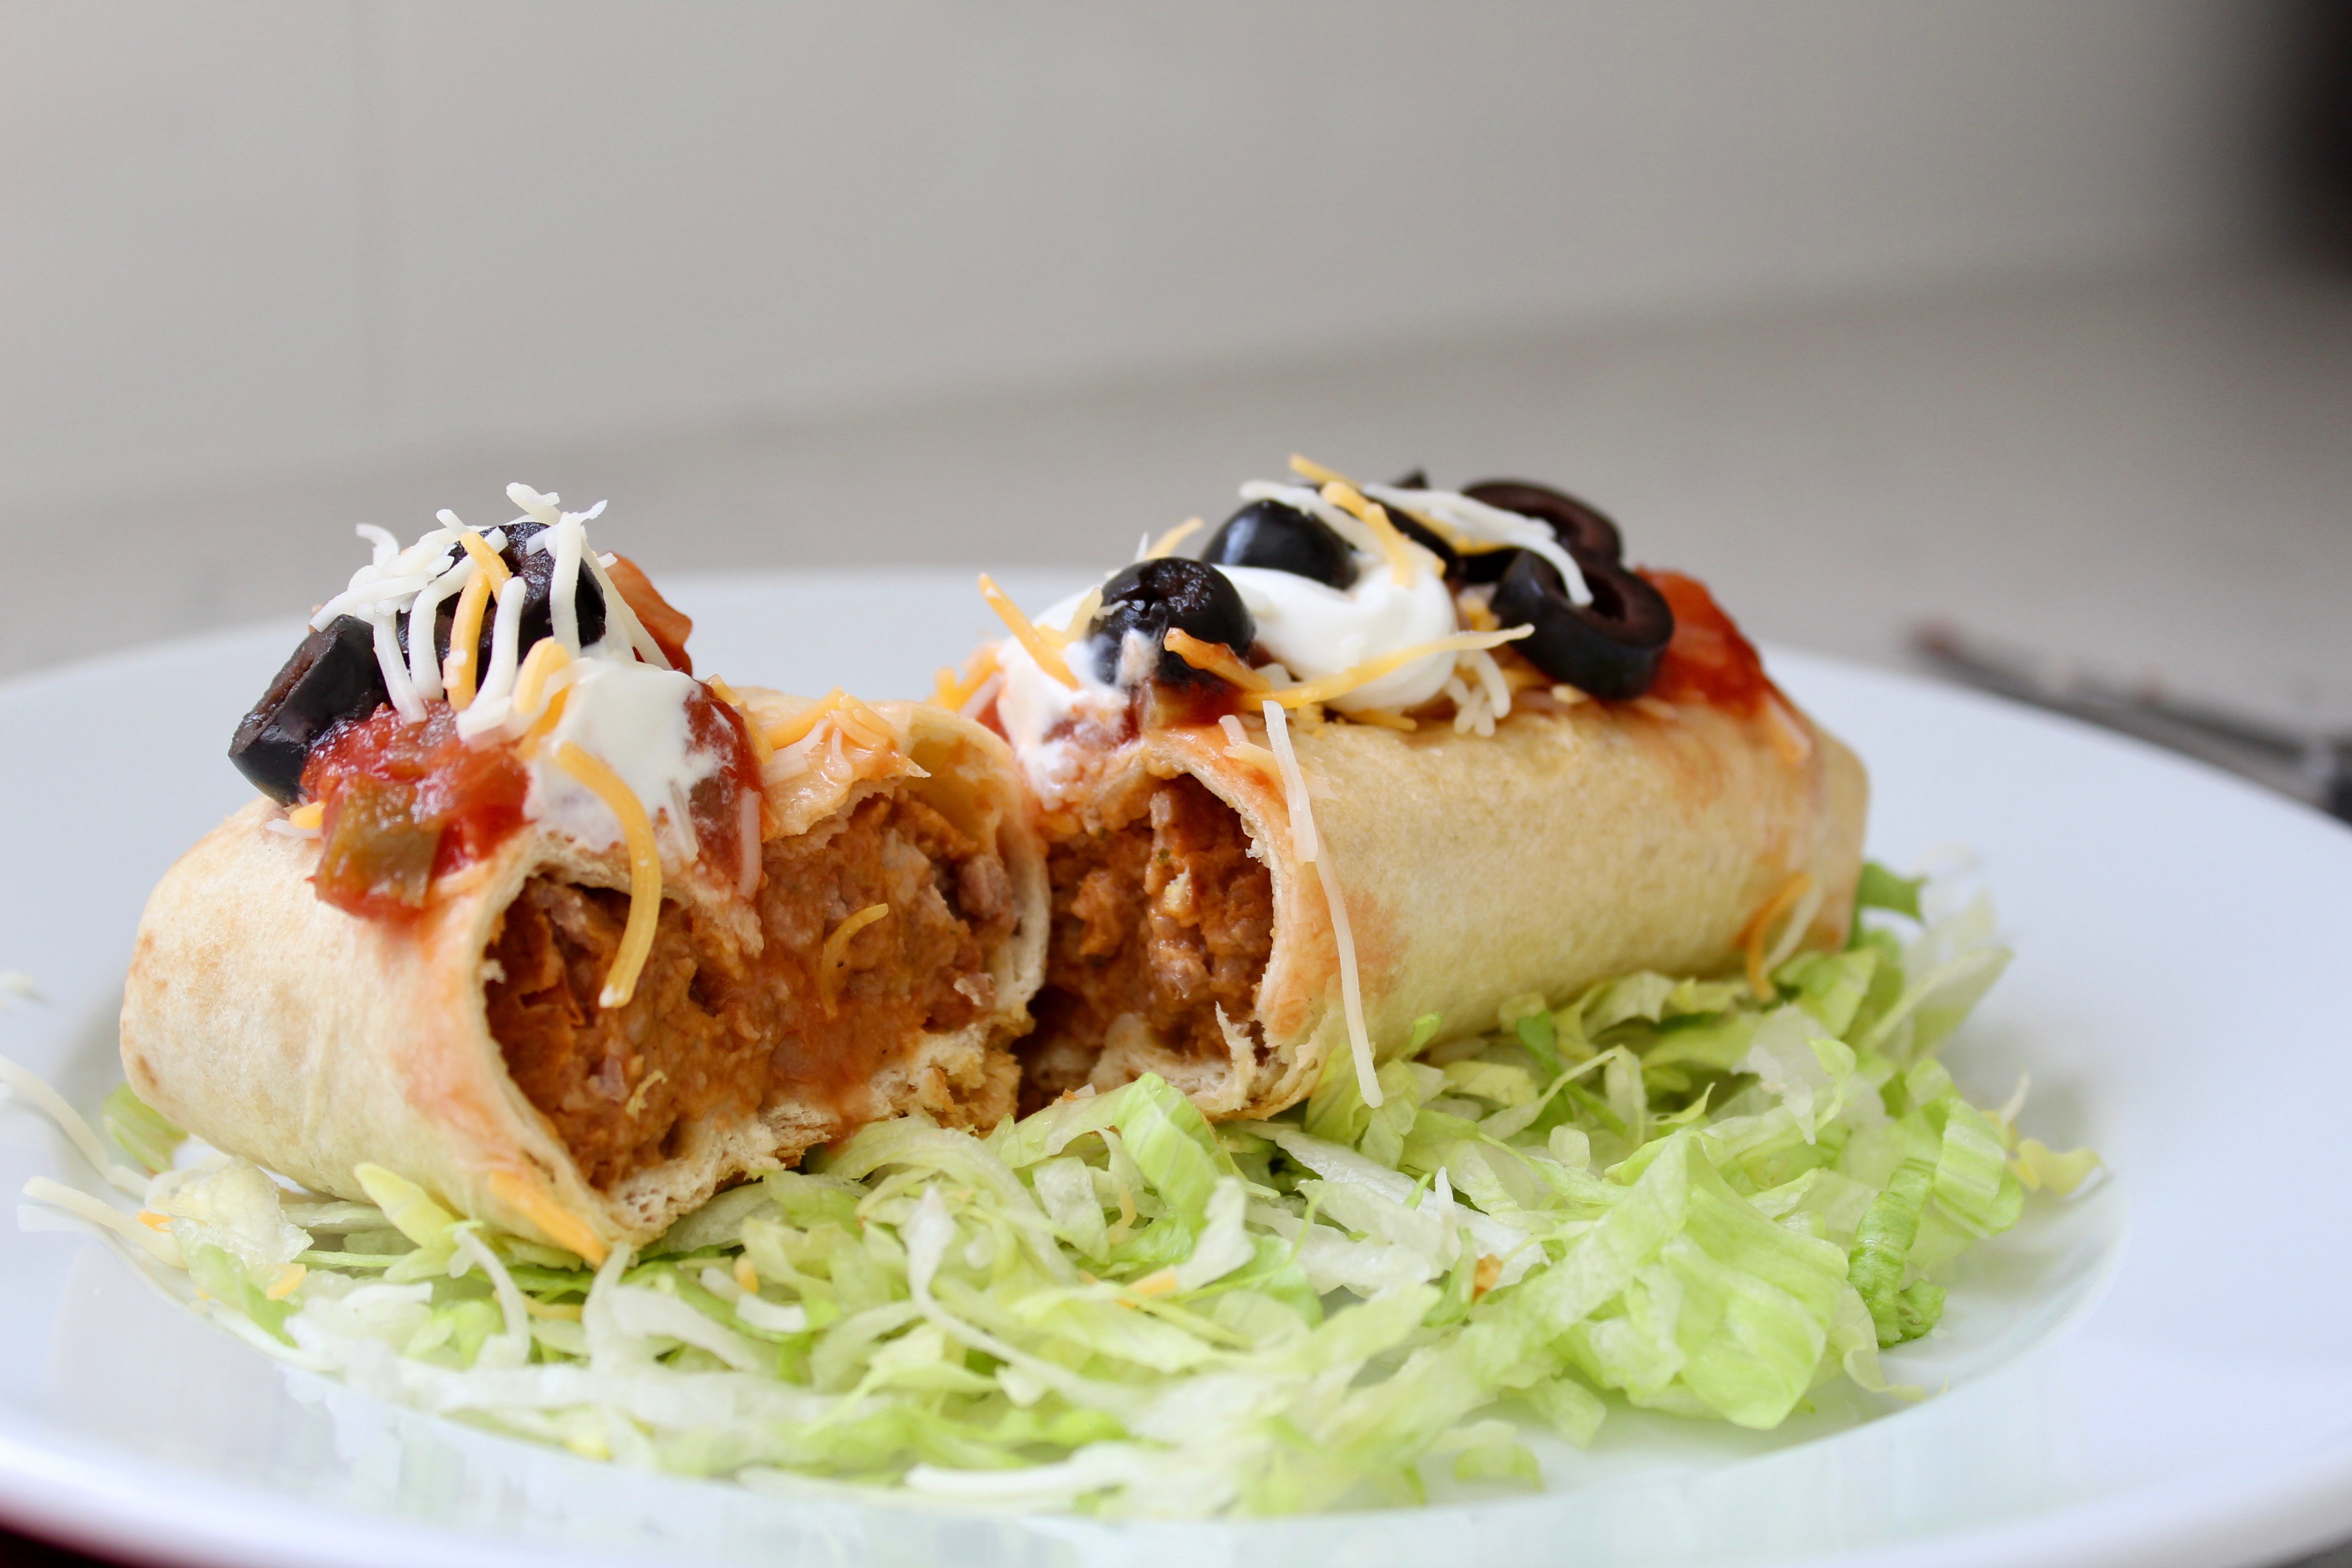 Impossible™ Baked Chimichangas